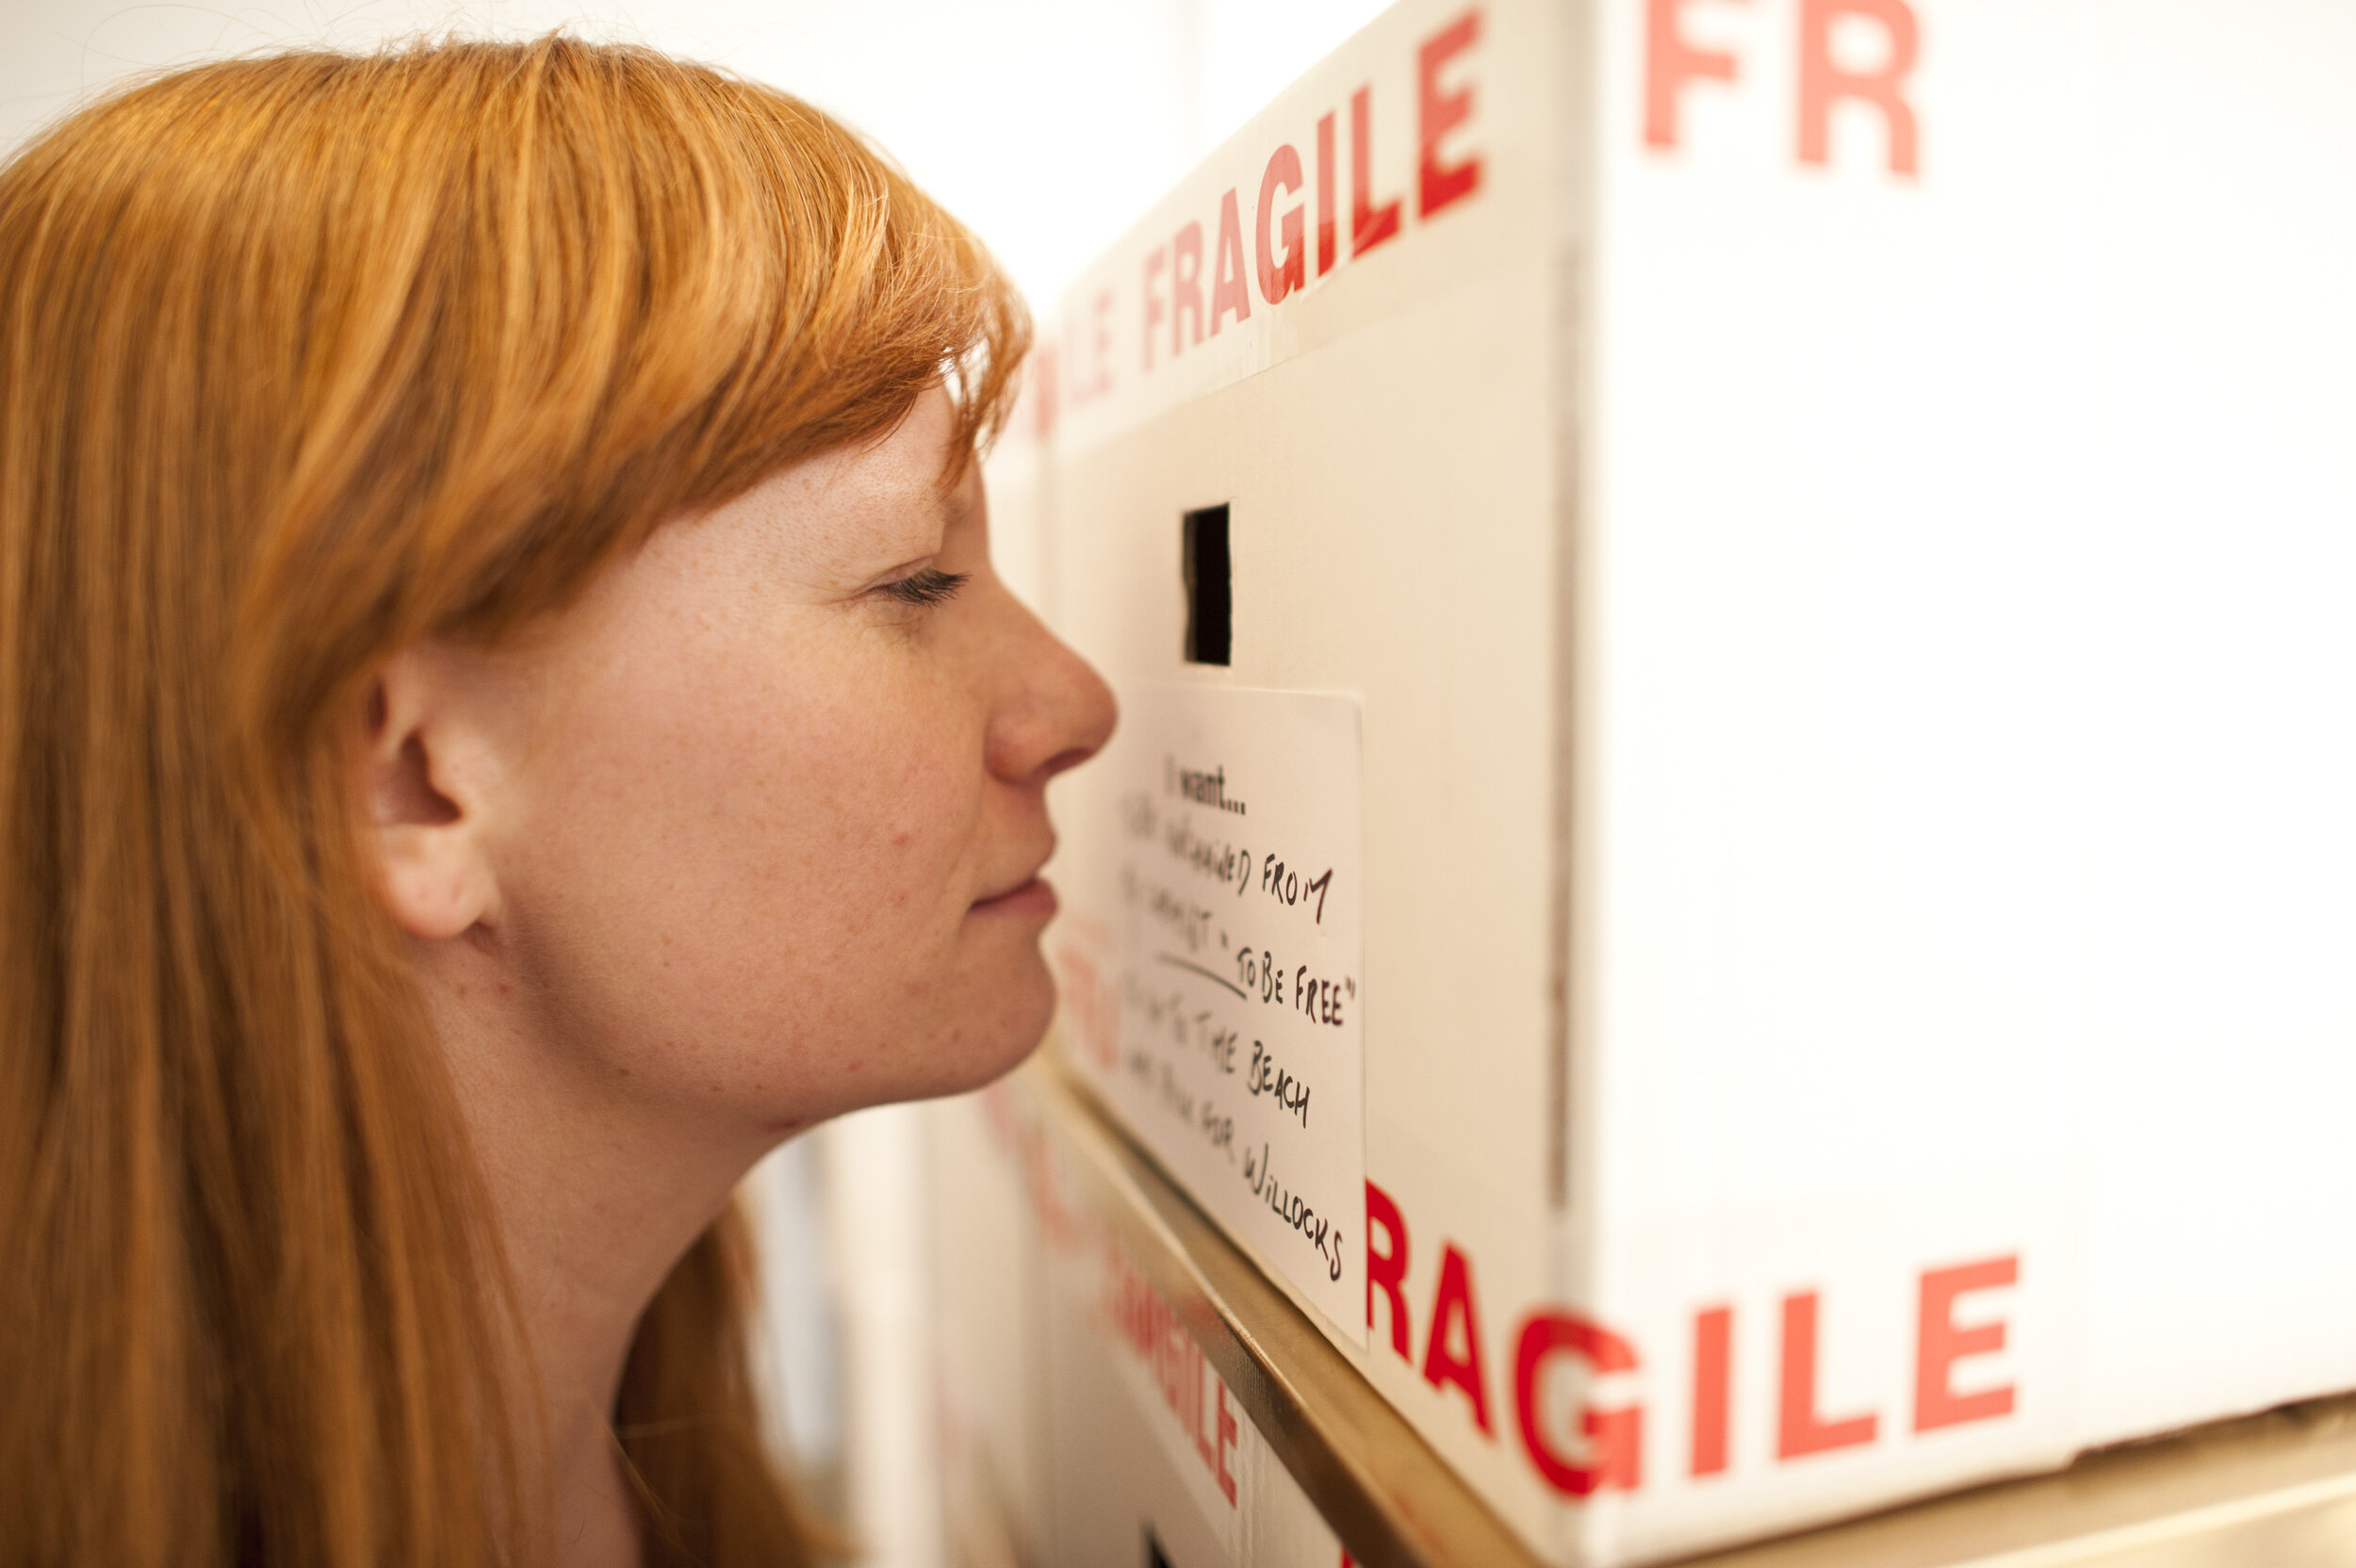  A woman peers into a cardboard box with fragile tape on it. 